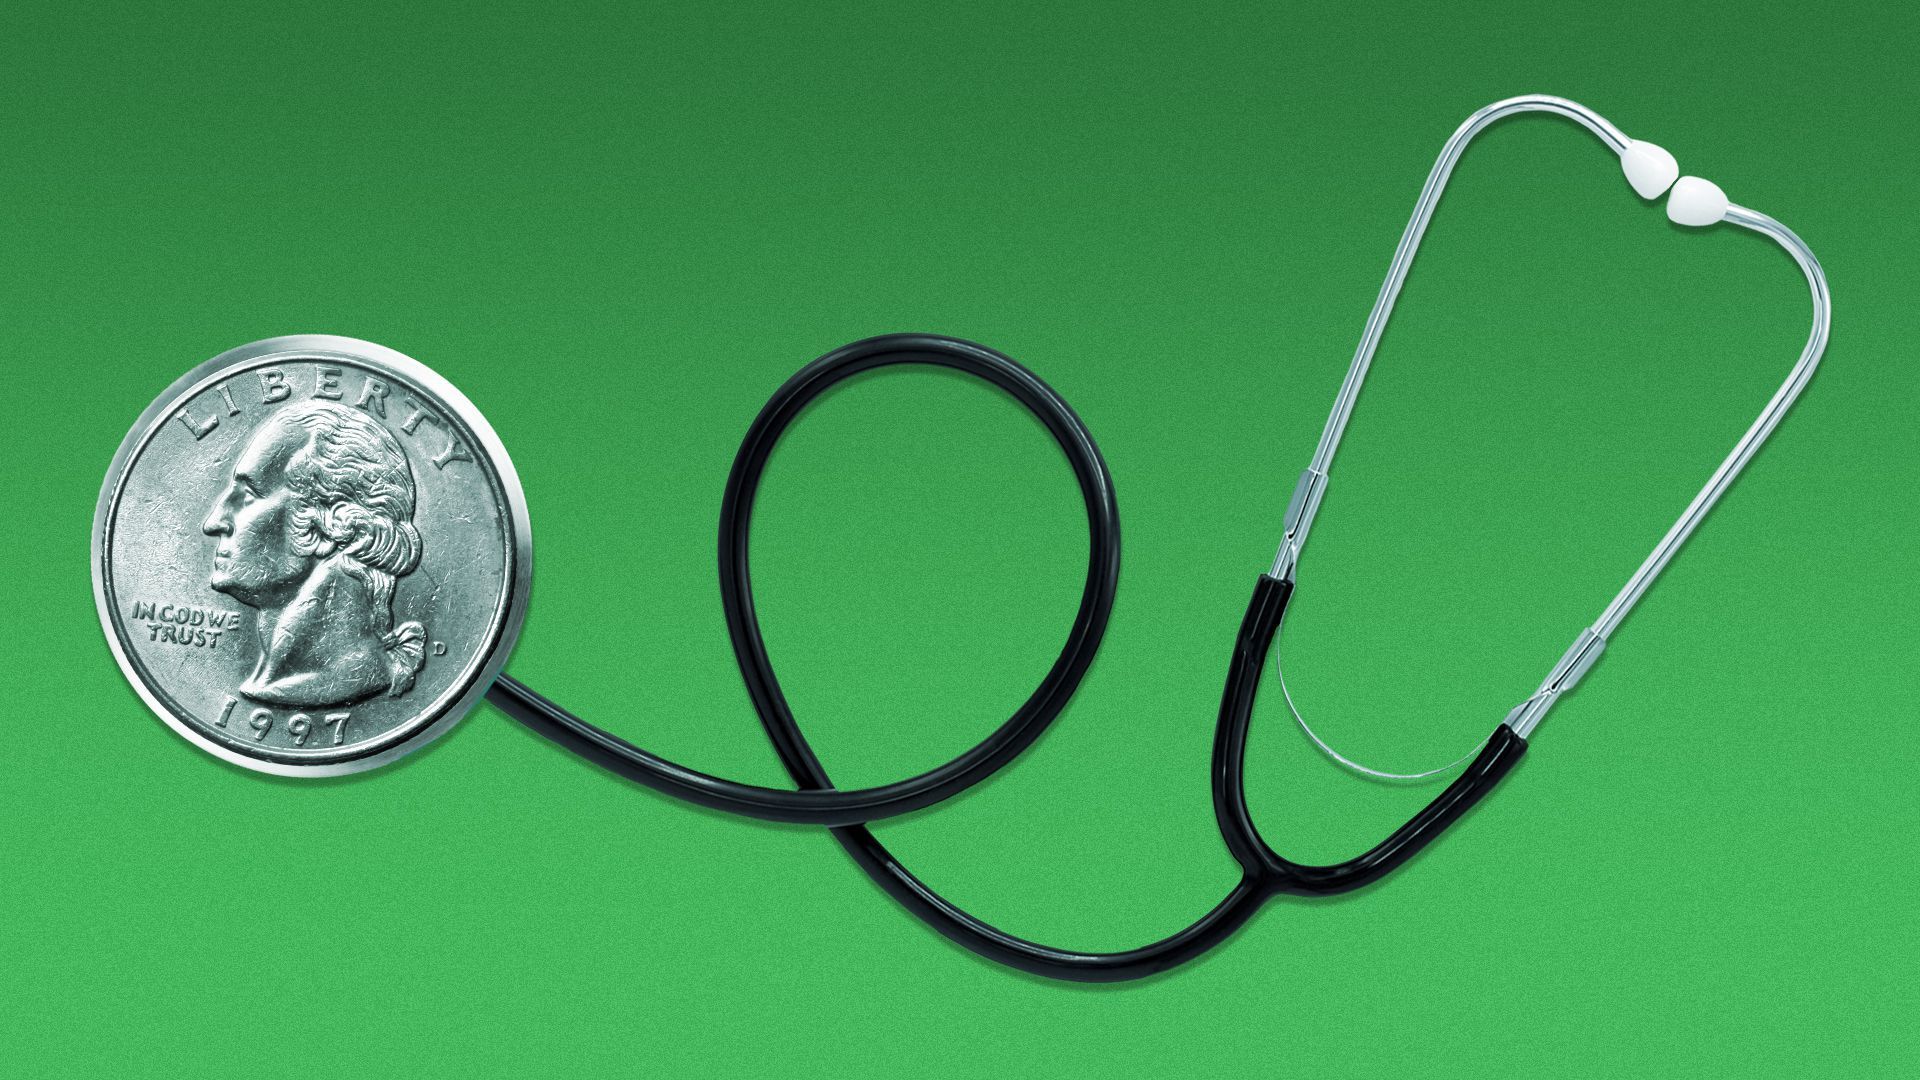 Image of a coin connected to a stethoscope.